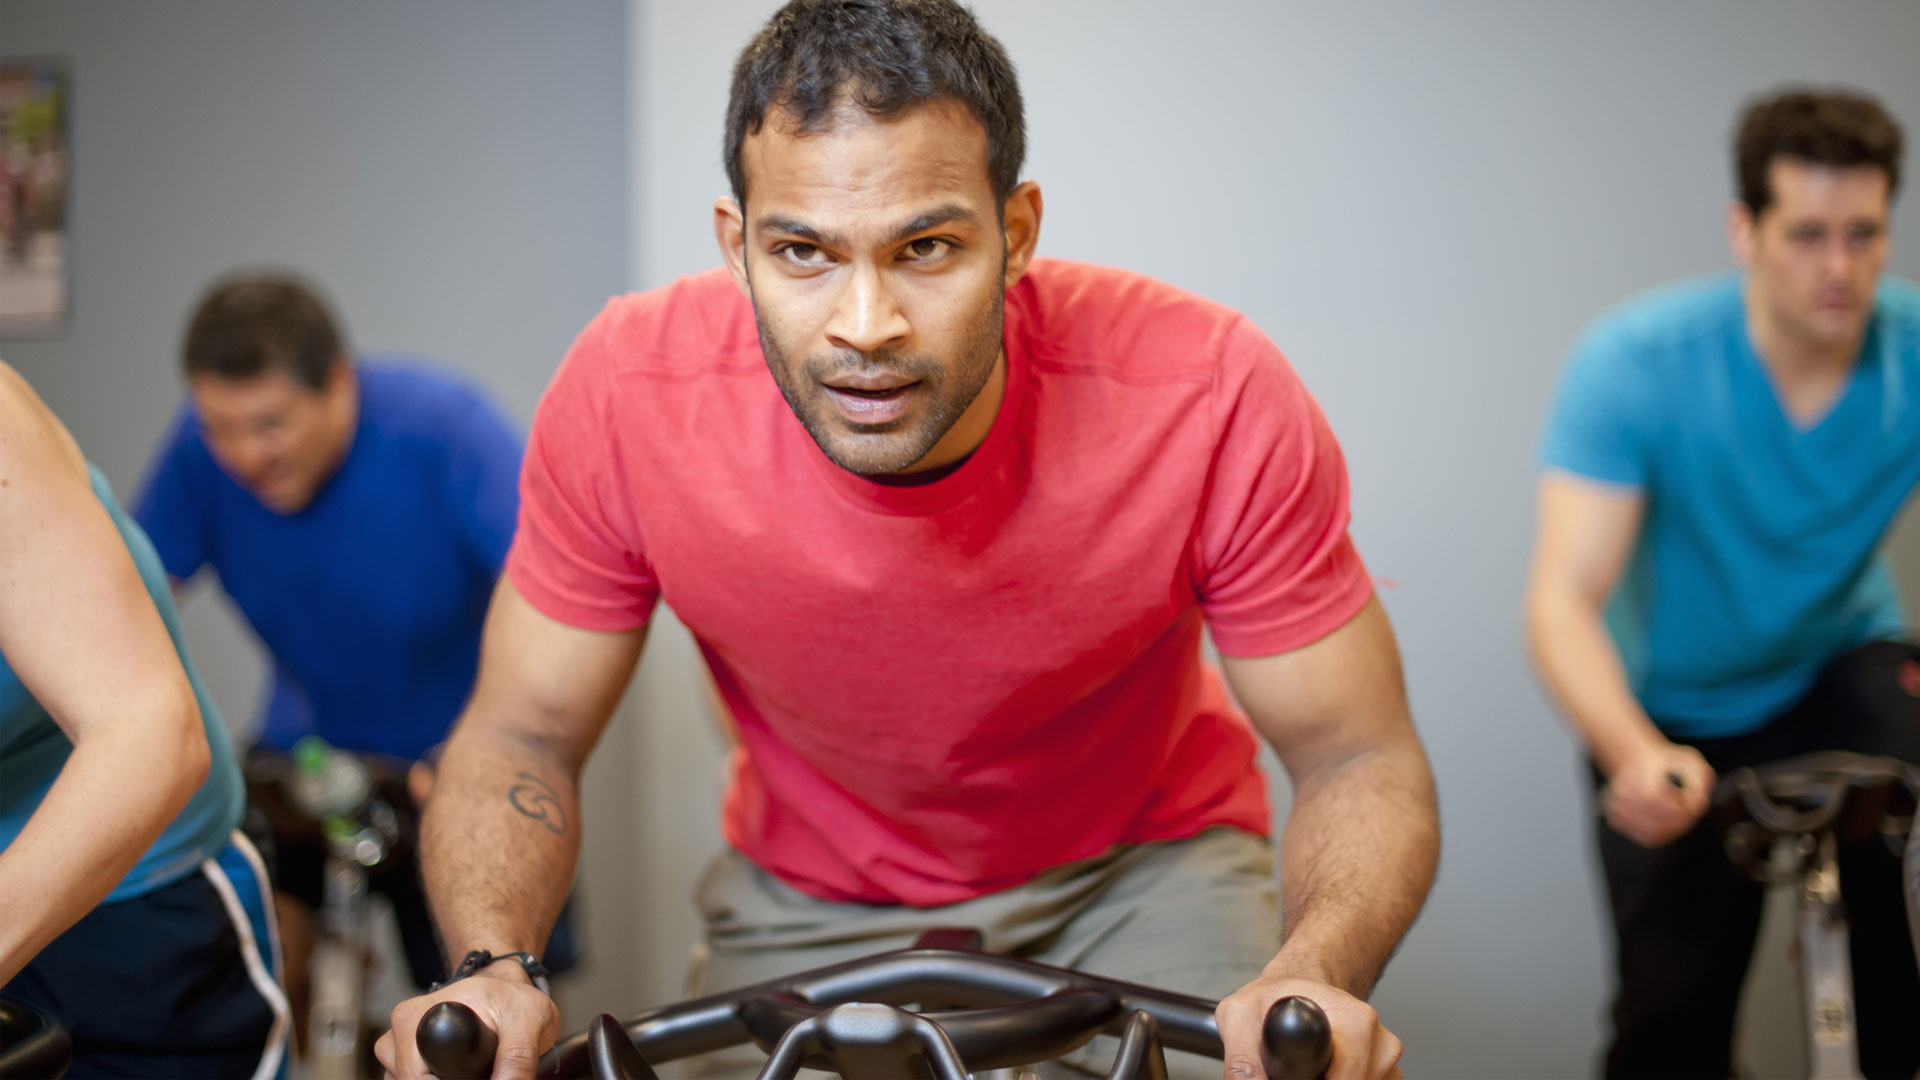 How to lose weight with an exercise bike: the image shows a man on an exercise bike